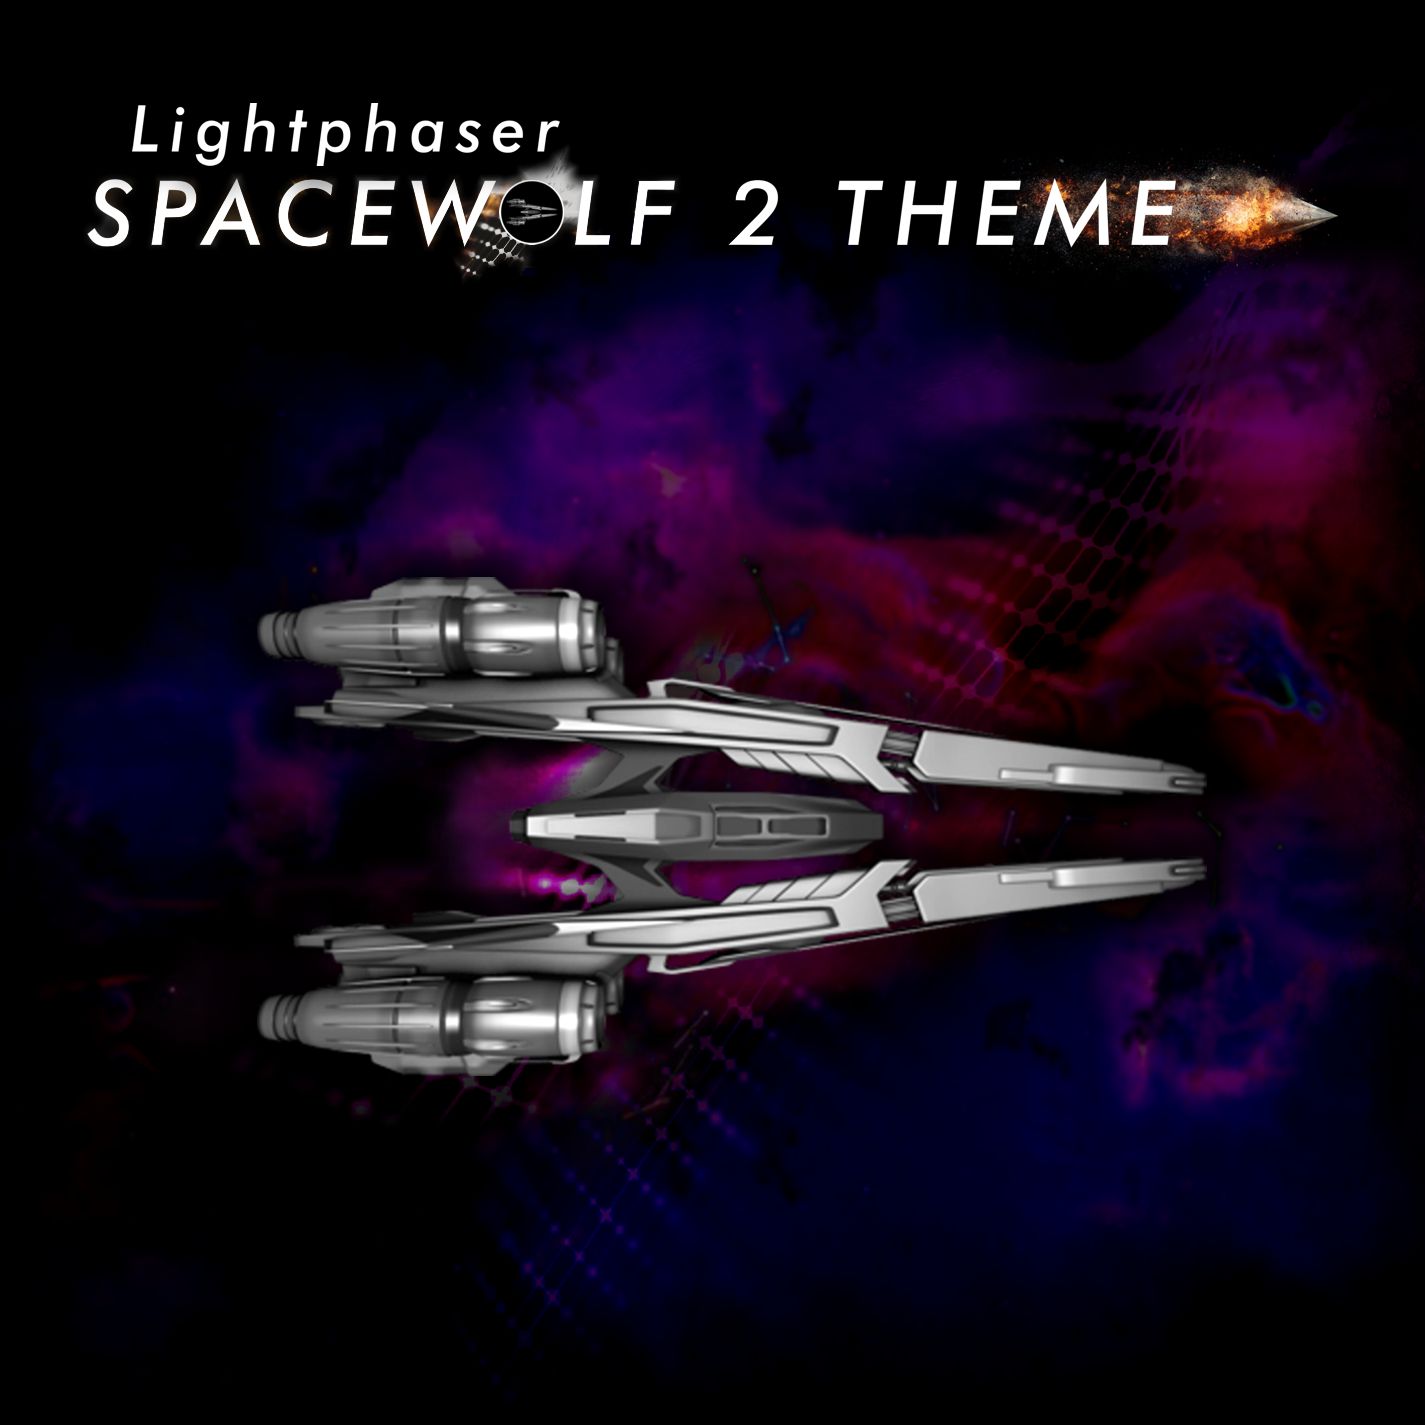 Spacewolf 2 Theme out NOW!